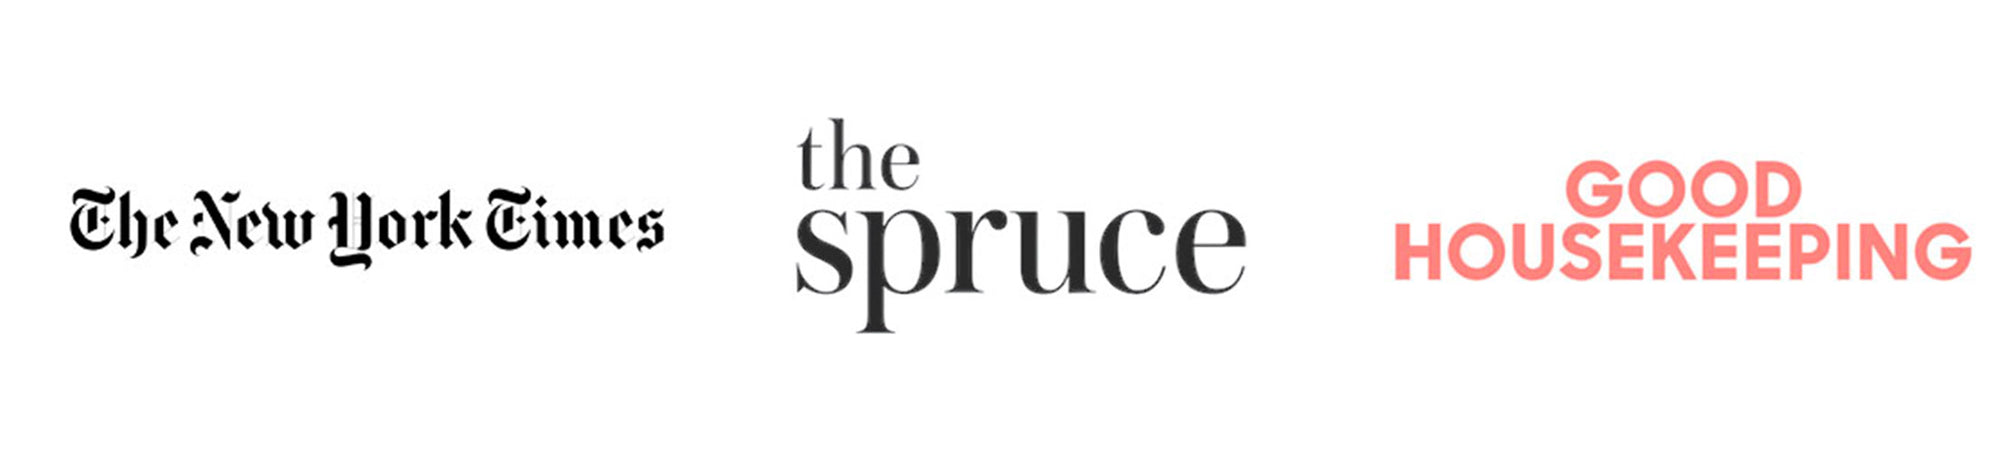 Logos - New York Times, the Spruce, Good Housekeeping